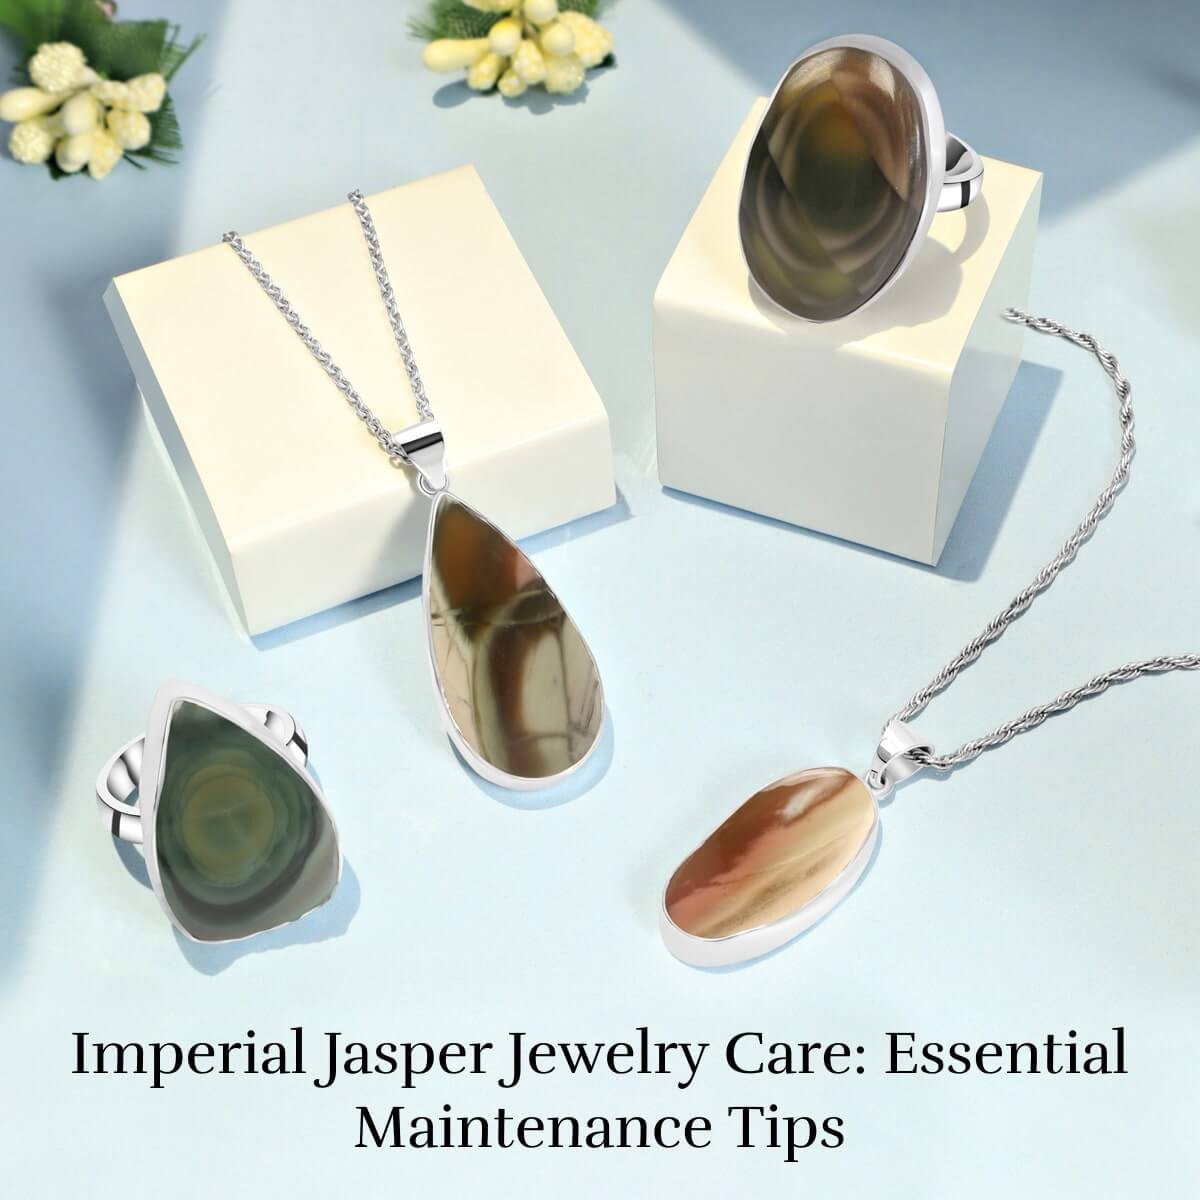 How to Care & Maintain Your Imperial Jasper Designer Jewelry